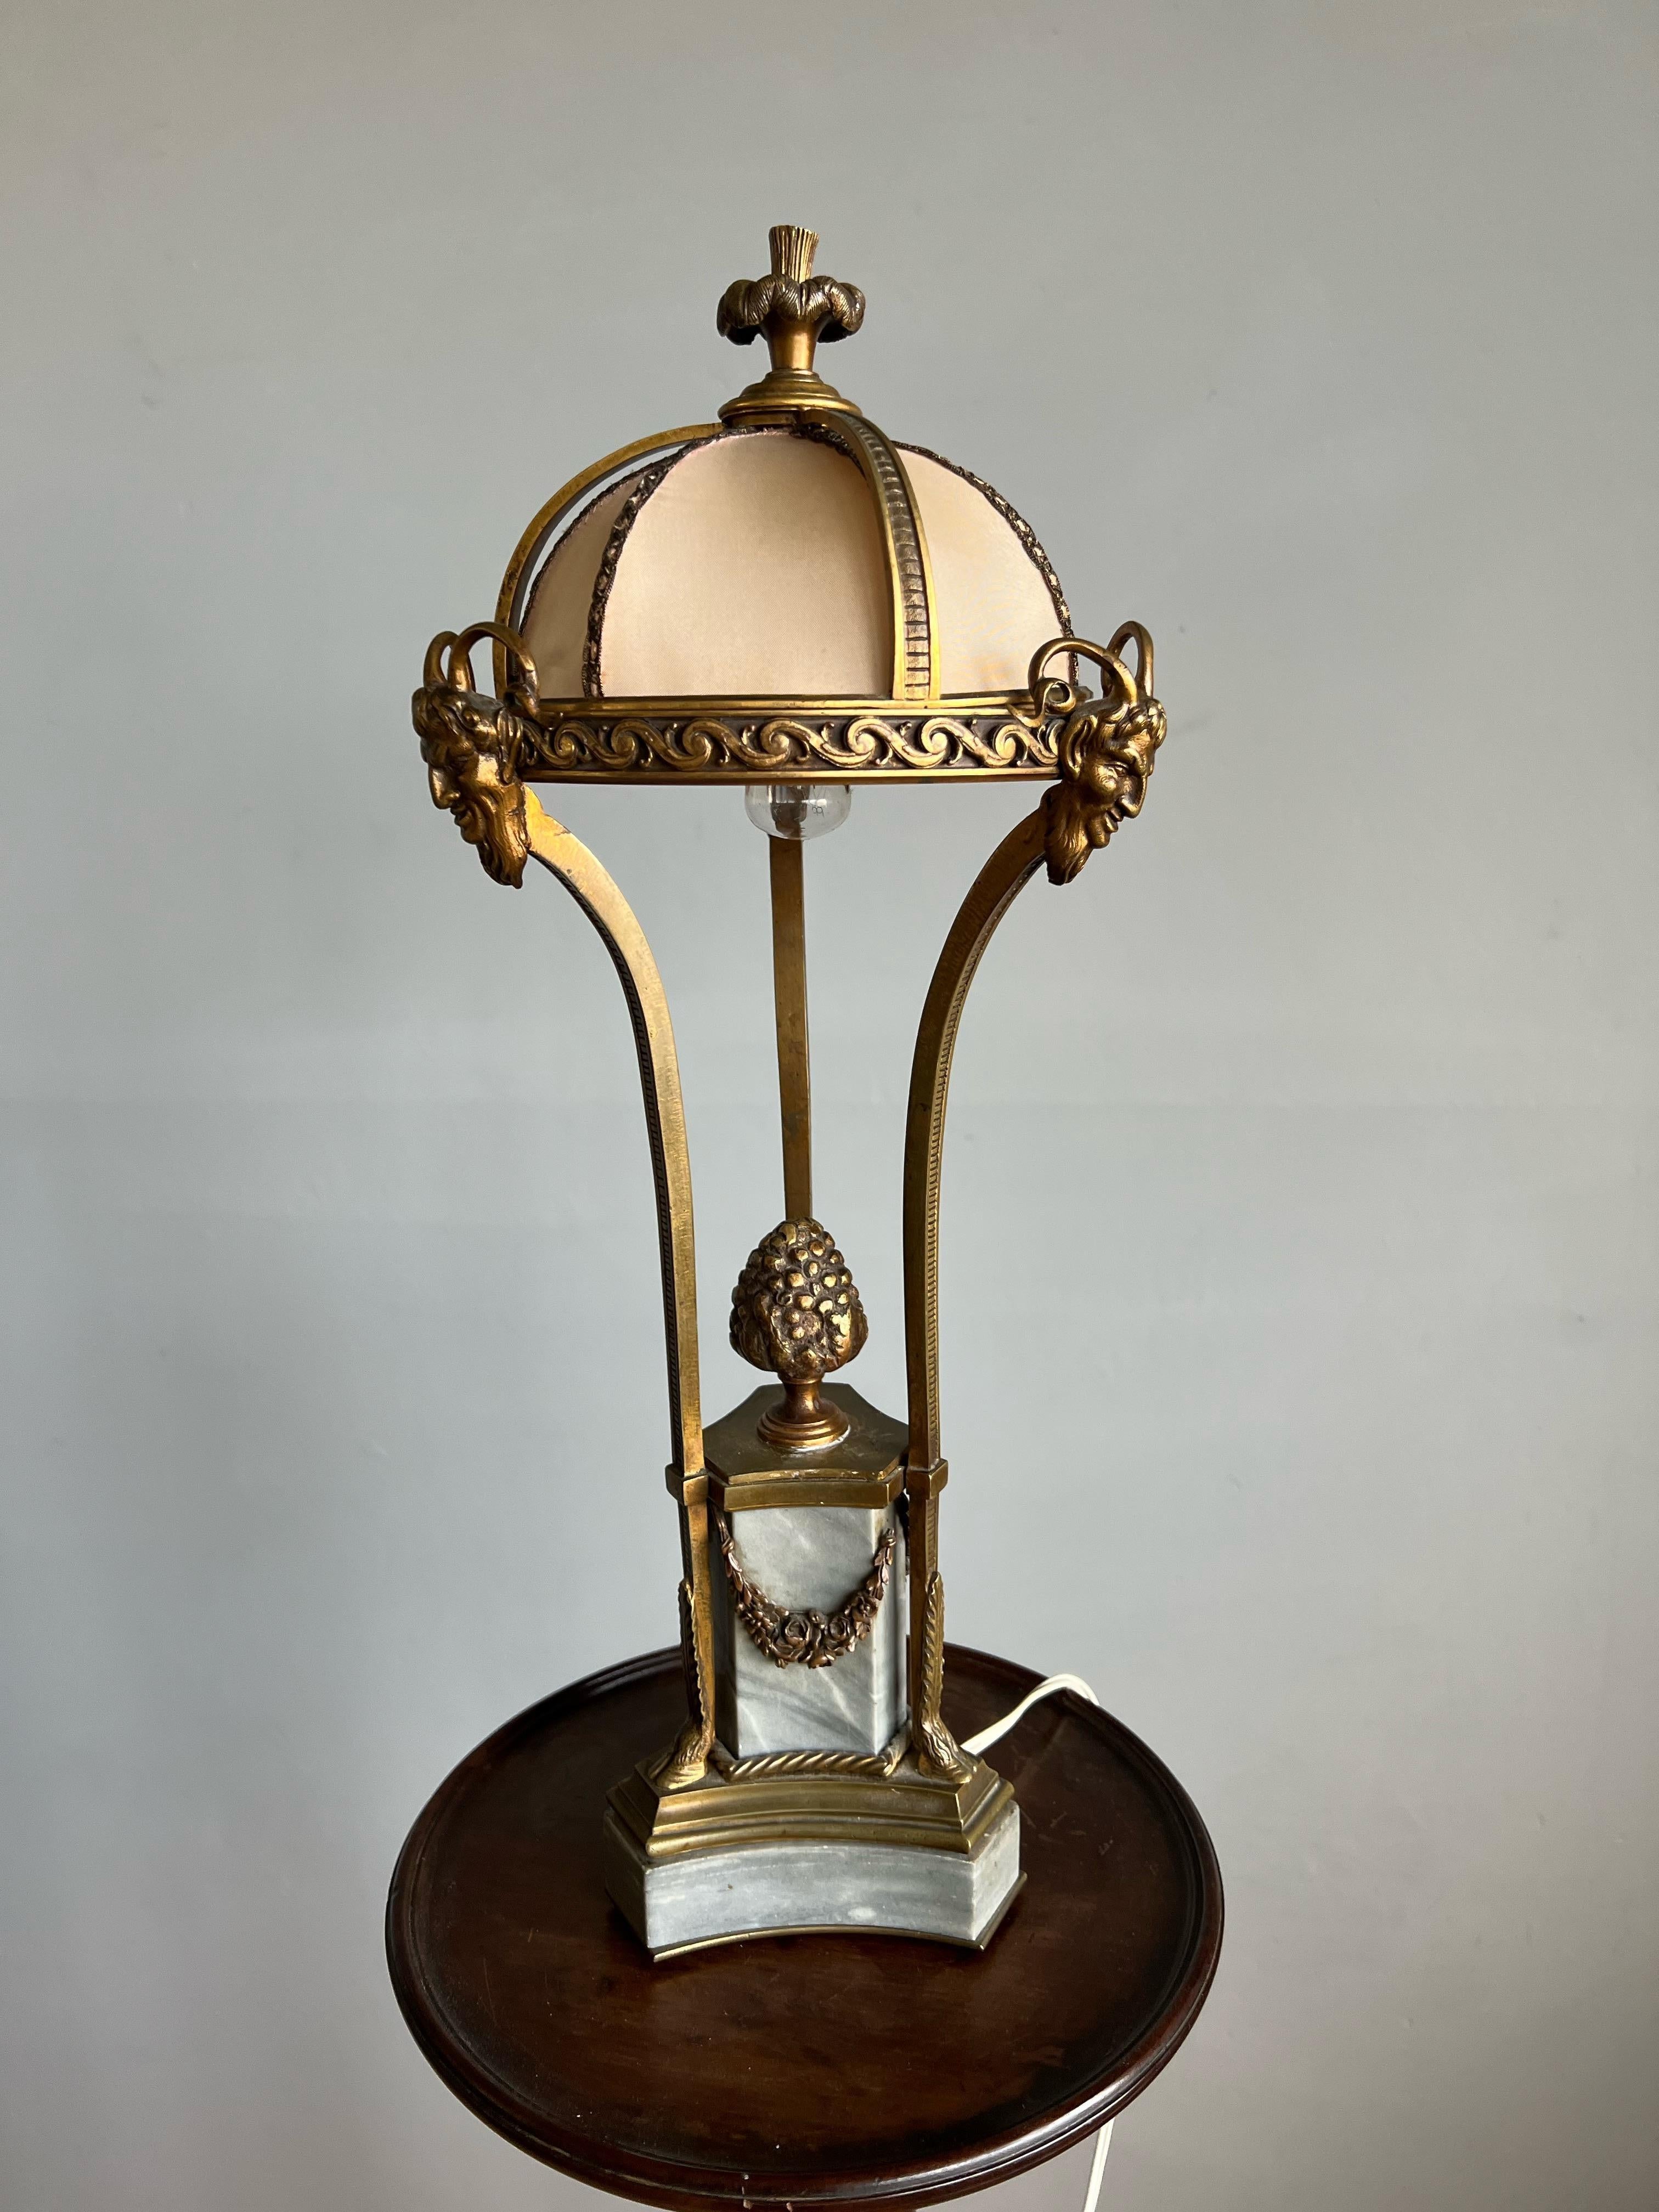 Wonderful Early 1900s Bronze and Marble Table / Desk Lamp with Faun Sculptures For Sale 11